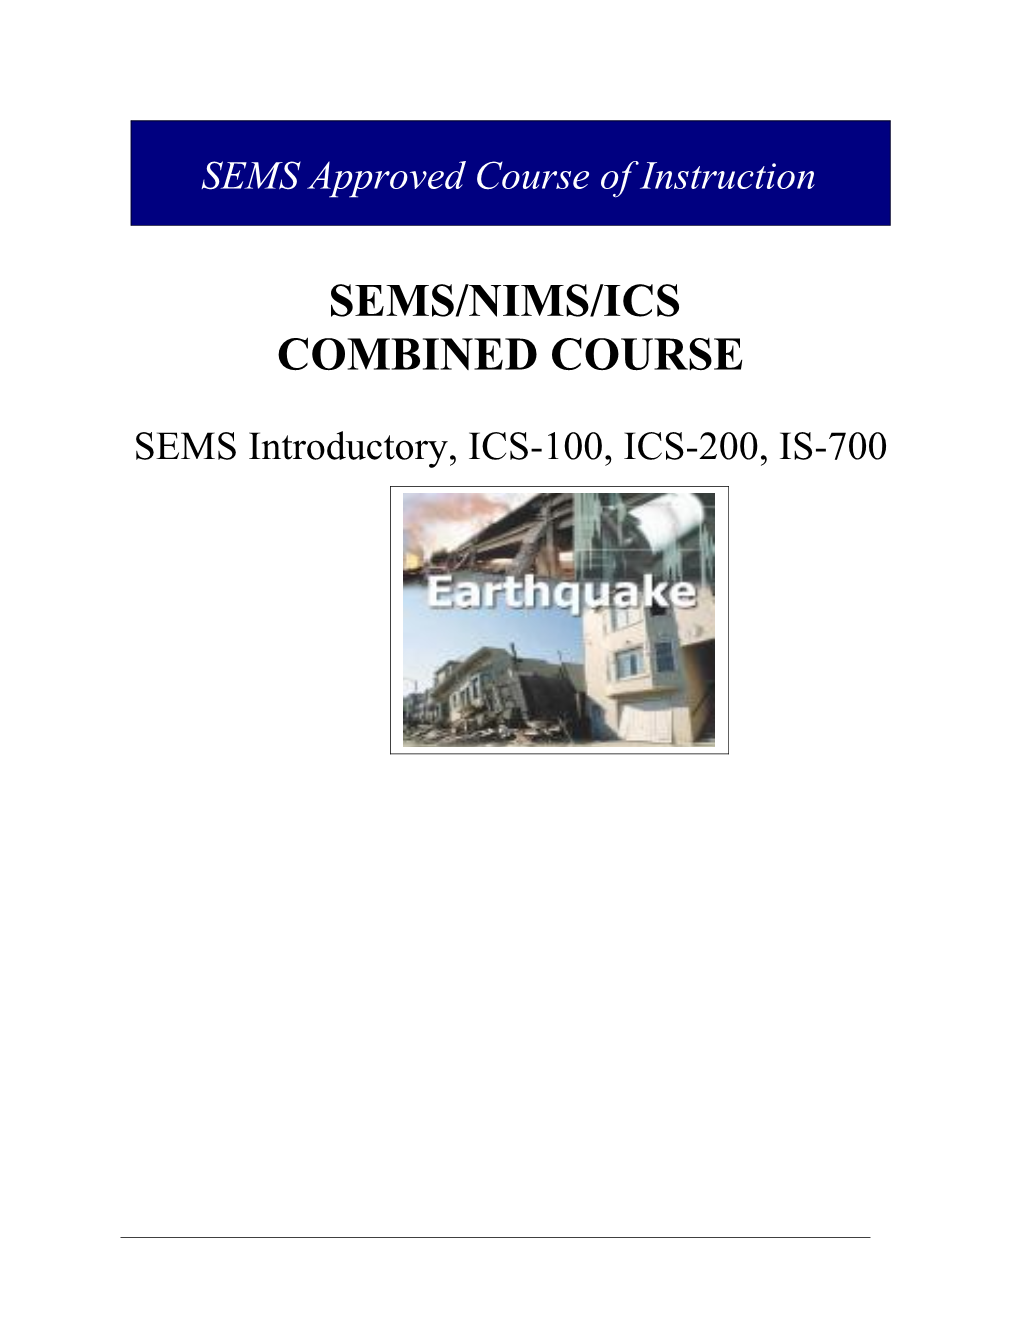 I. SEMS Terminology, Components, and Features